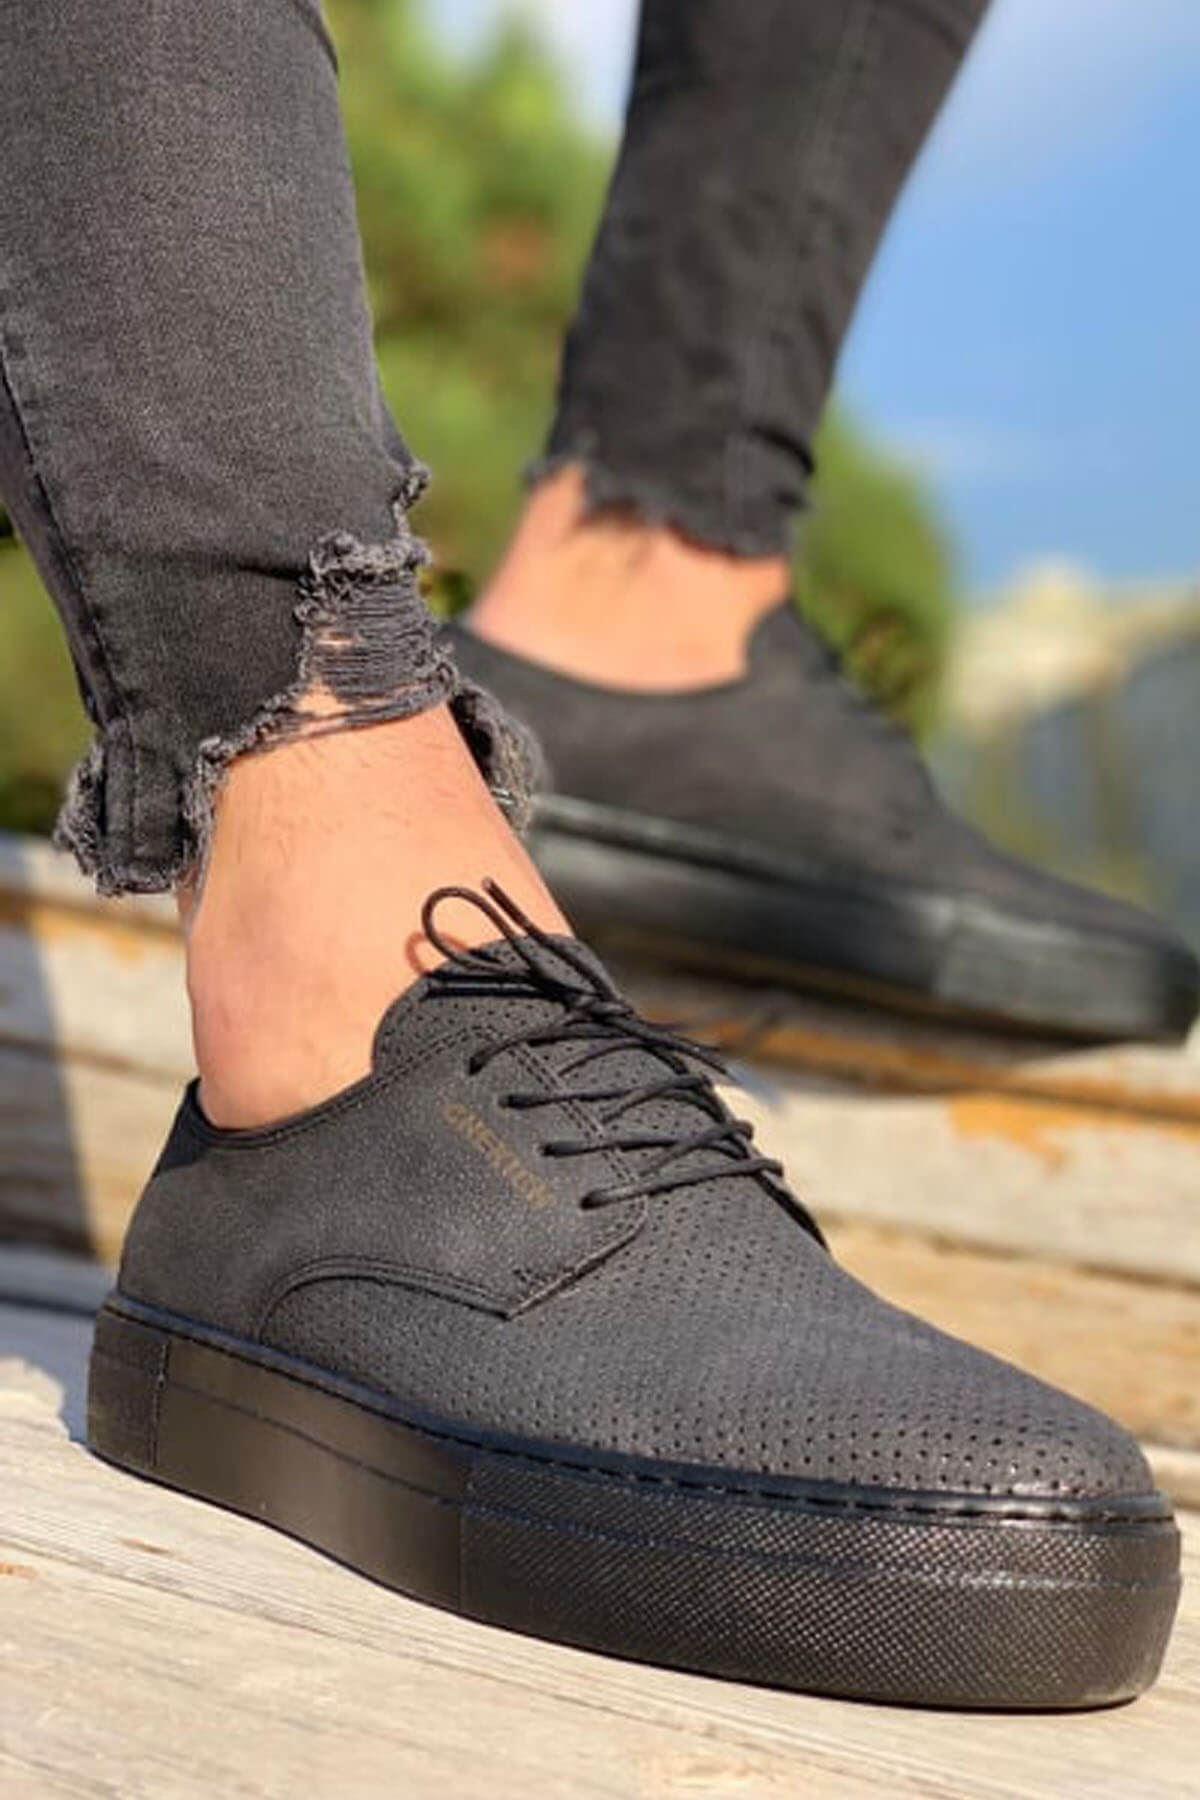 CH061 Men's Full Black Lace-up Casual Sneaker Sports Shoes - STREET MODE ™